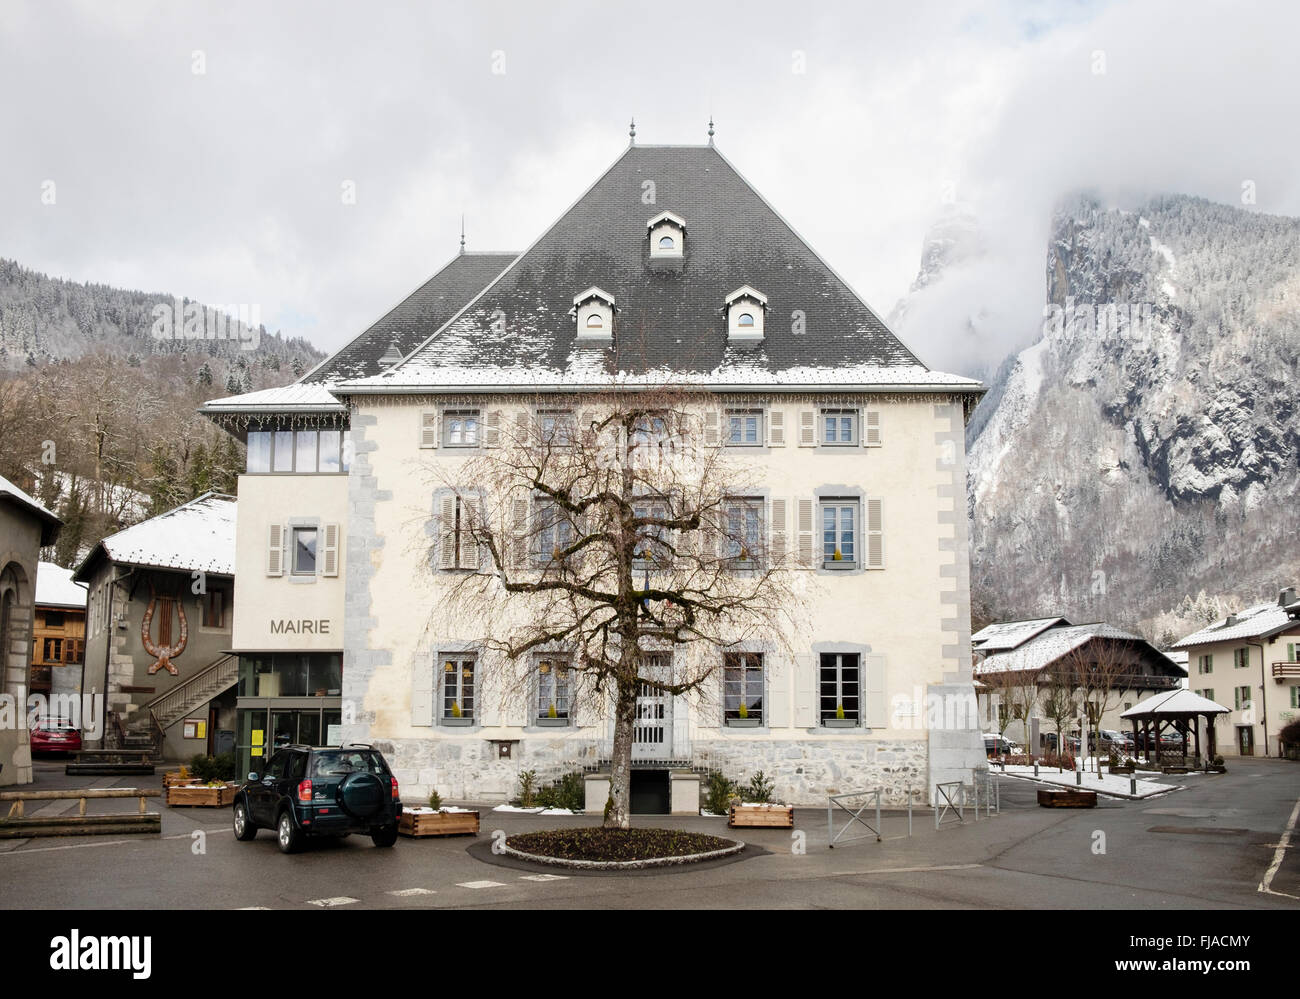 The Mairie building in traditional alpine village. Place des Dents Blanches, Samoens, Vallée du Giffre, Rhone-Alpes, France Stock Photo